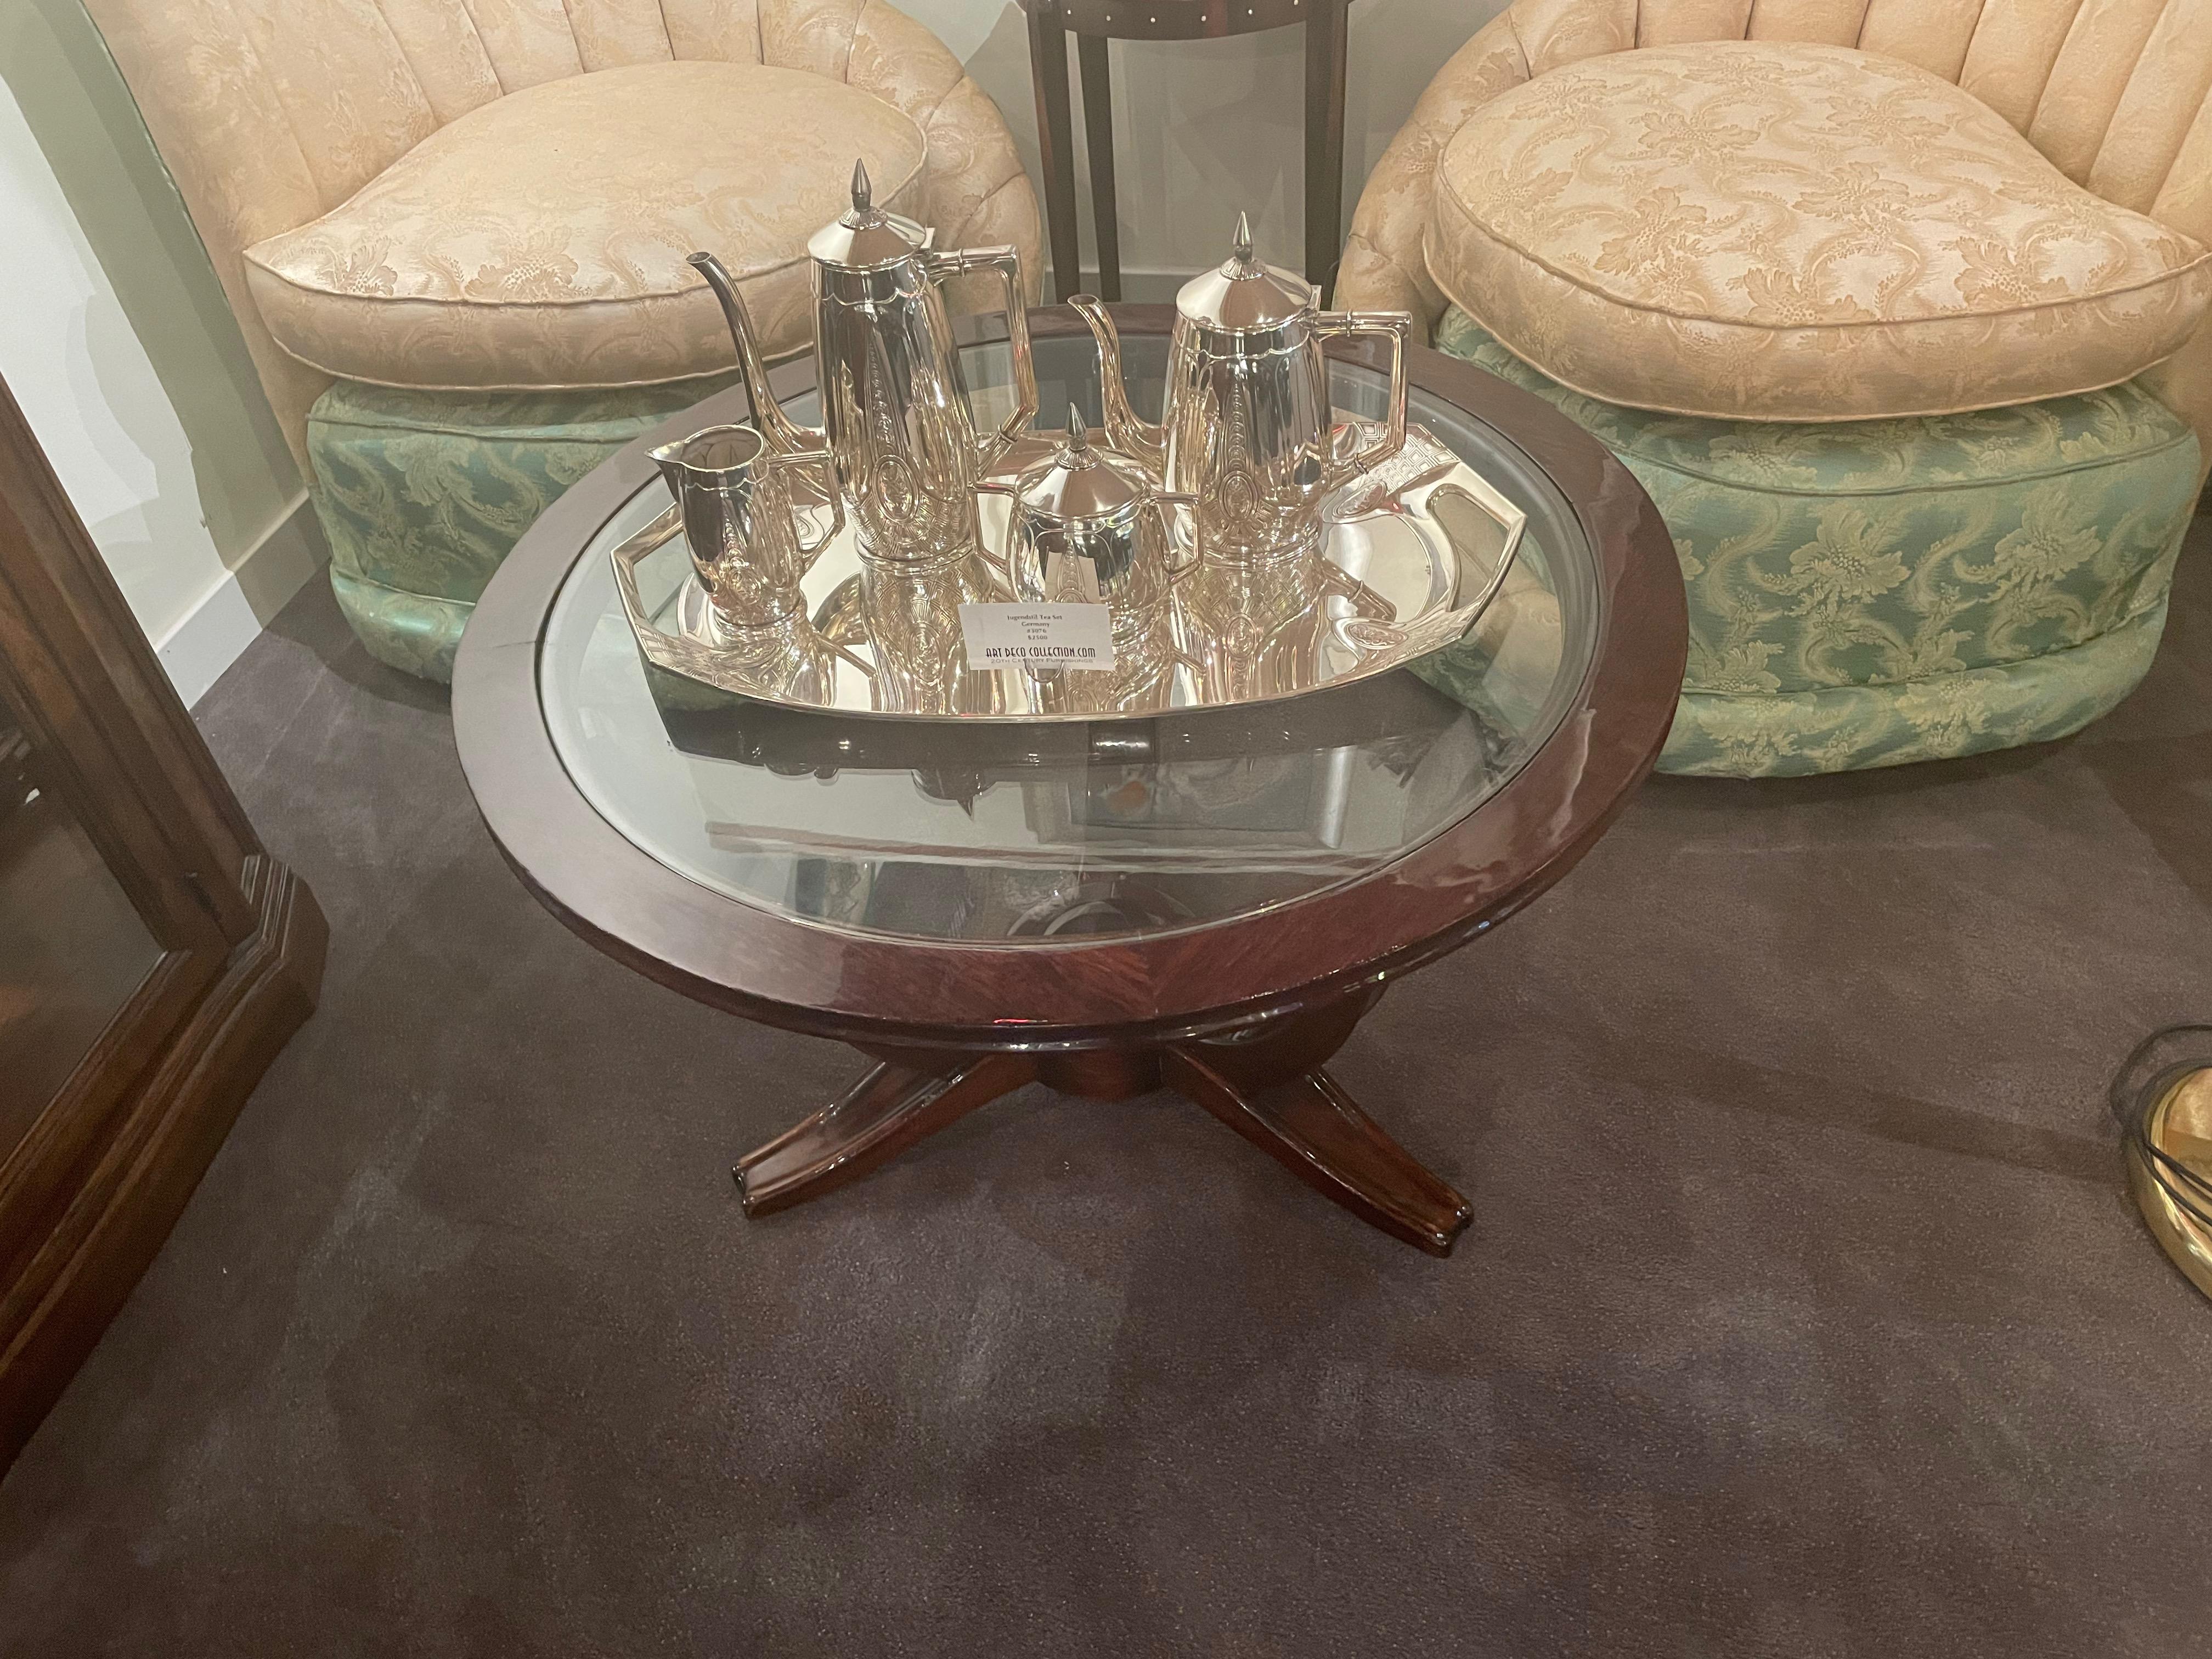 Lelu Style Art Deco French Round Wood Coffee Table with Glass Top In Good Condition For Sale In Oakland, CA